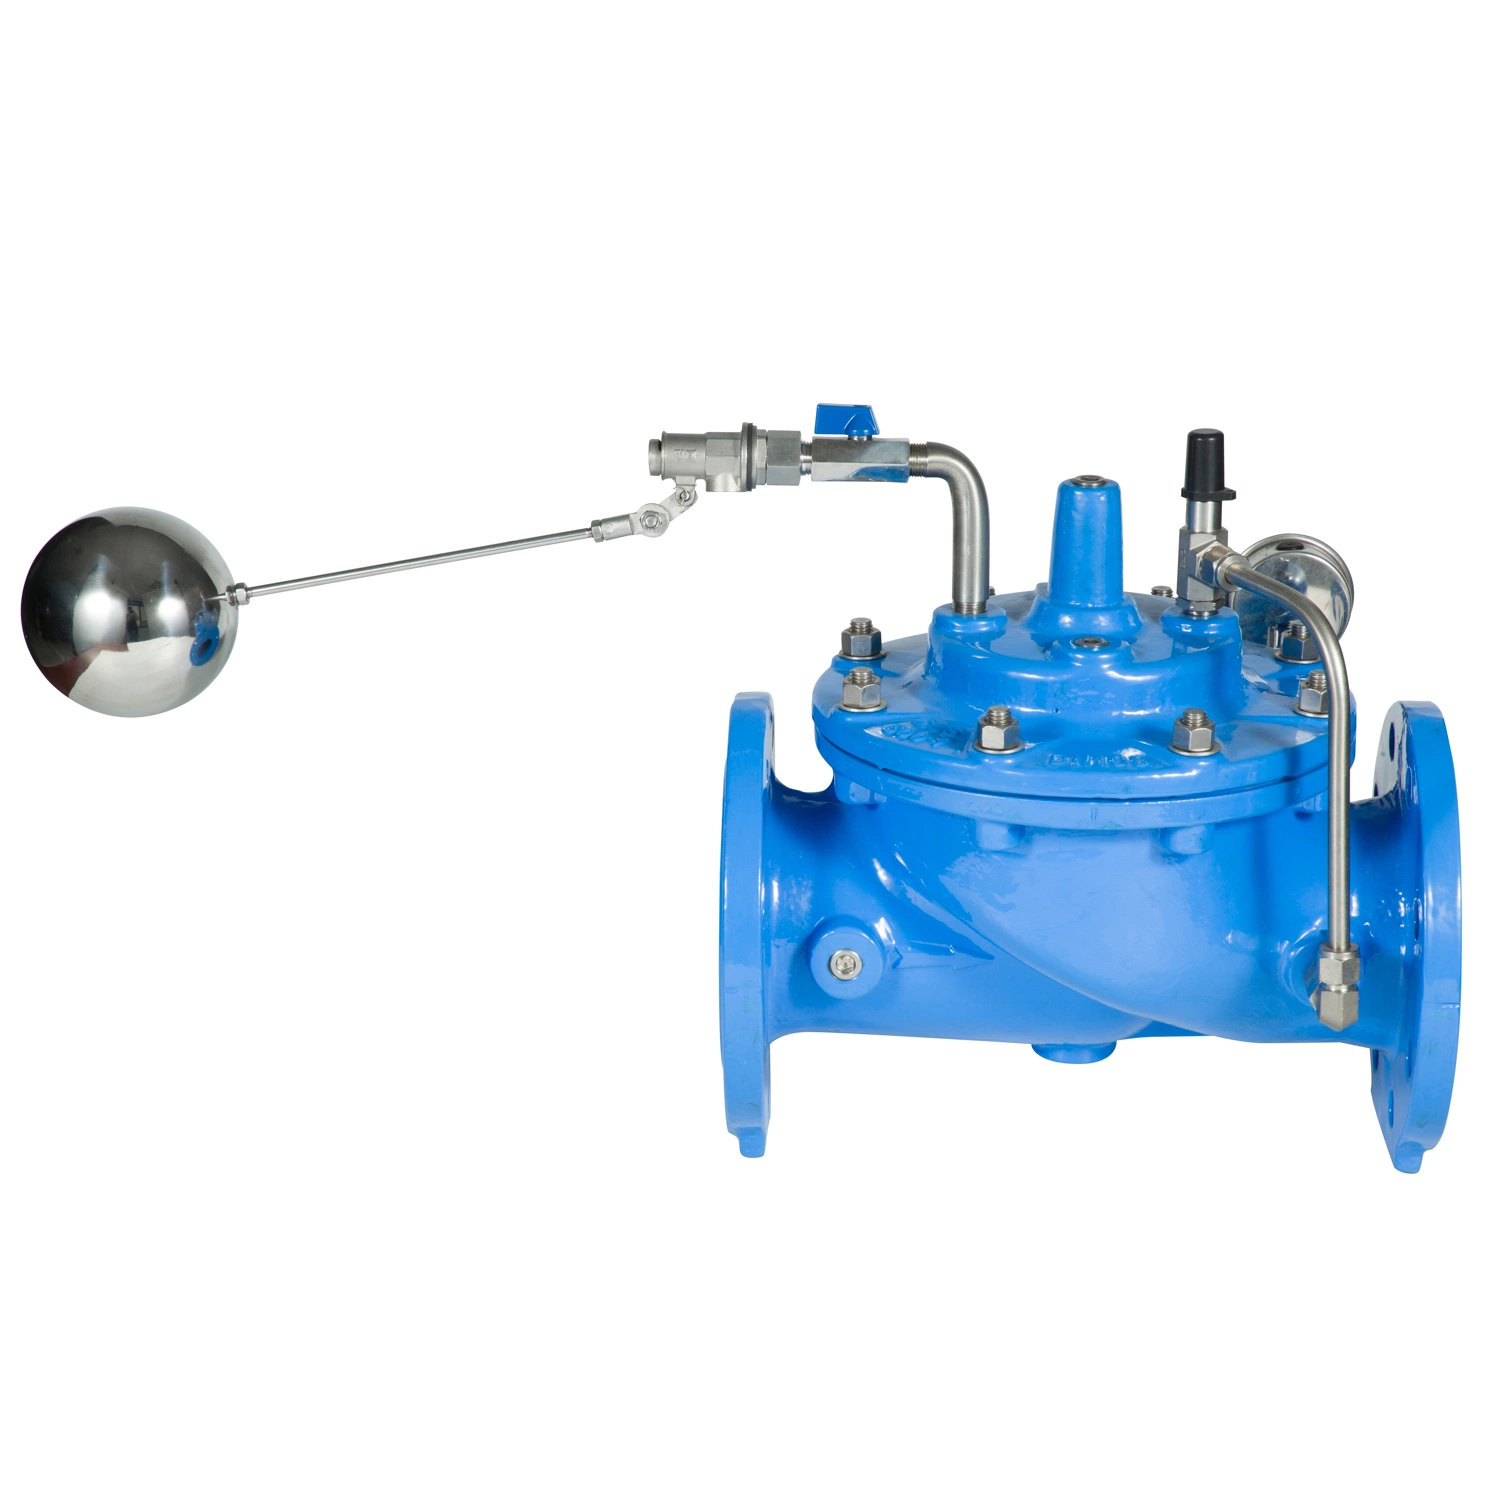 EMS Certificated Hydraulic Float Control Valve/Water Valve/Water Flow Control Valve/Float Control Valve/Hydraulic Valve/Stainless Steel Float Valve